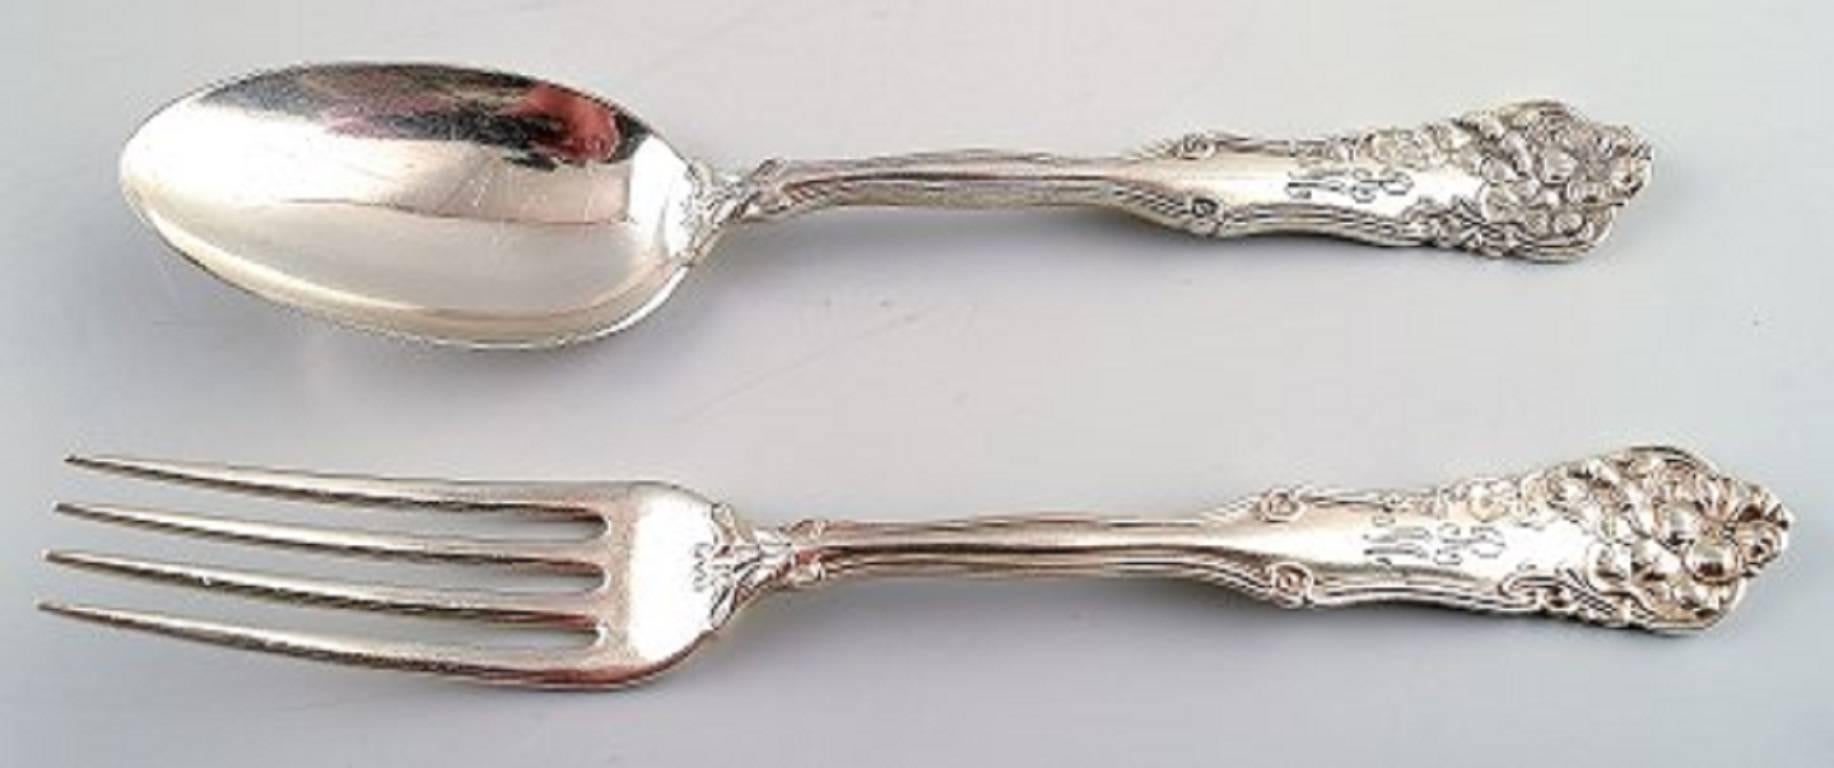 13 pieces American silver, Wallace sterling and W. Rogers, with rich ornamentation.

Consisting of seven spoons, four forks, bottle opener and a large fork.

Stamped.

The large fork measures 20 cm.

In good condition, some pieces with engravings.